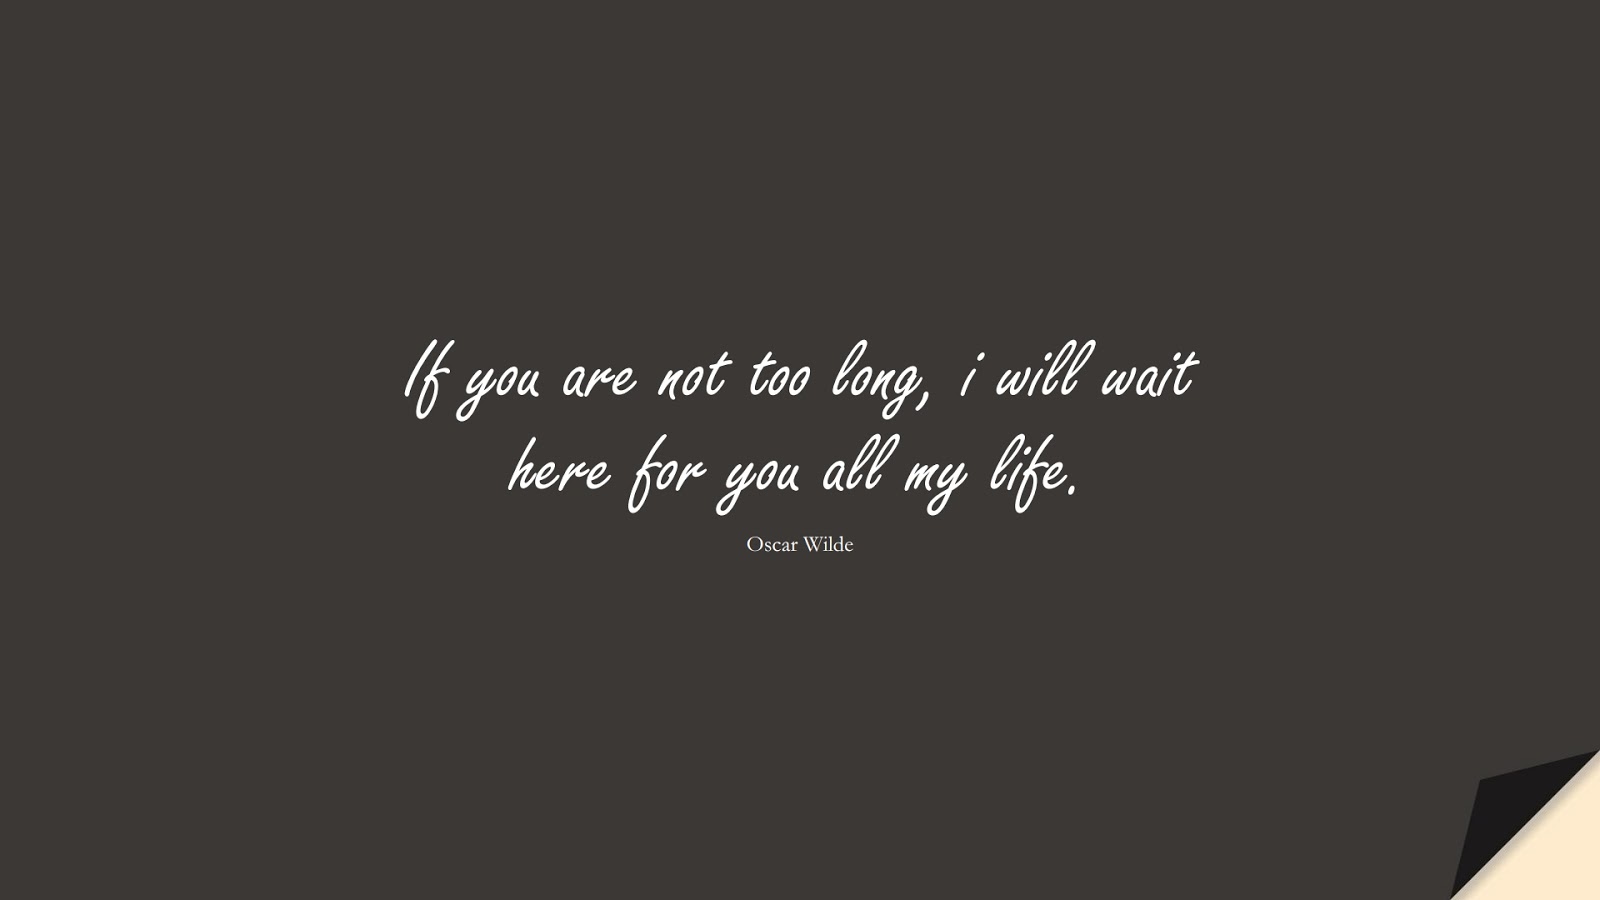 If you are not too long, i will wait here for you all my life. (Oscar Wilde);  #ShortQuotes